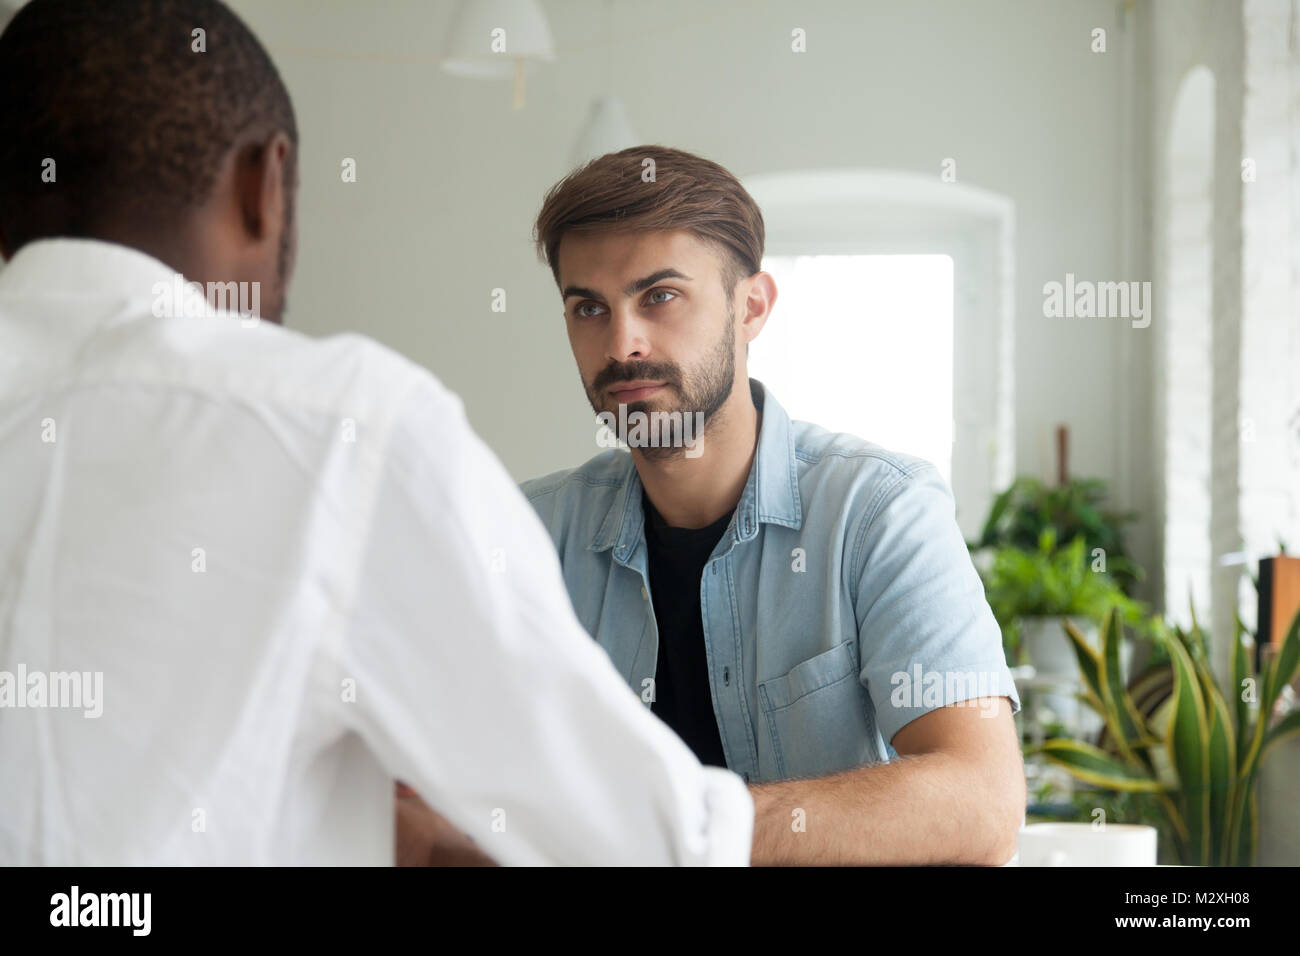 Serious businessman thinking considering decision at business di Stock Photo